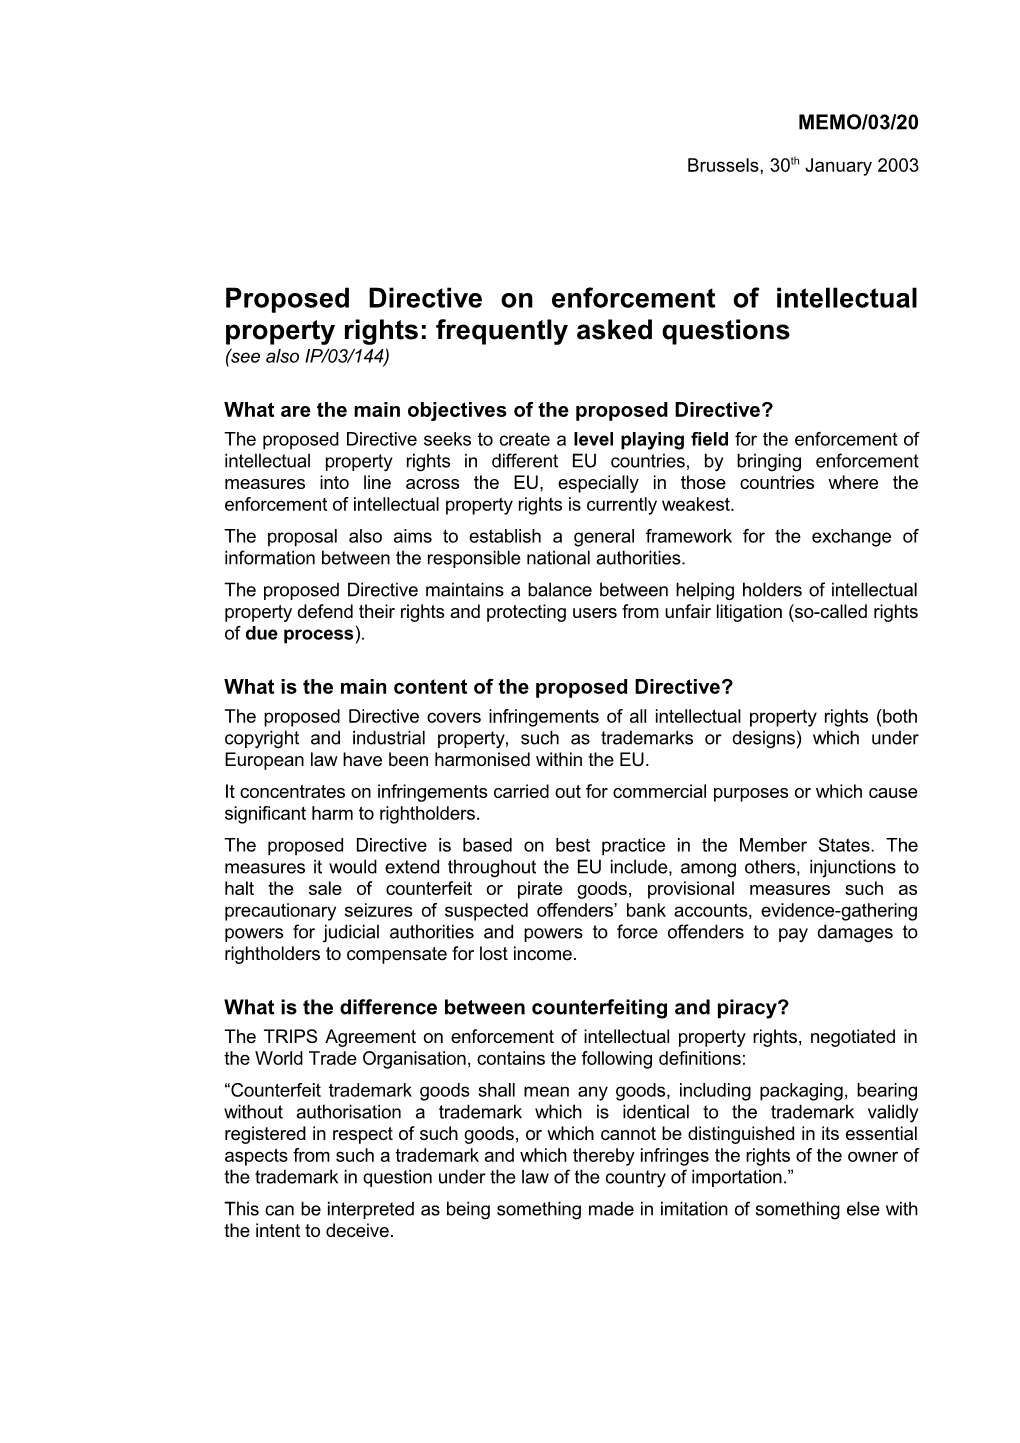 Proposed Directive on Enforcement of Intellectual Property Rights: Frequently Asked Questions